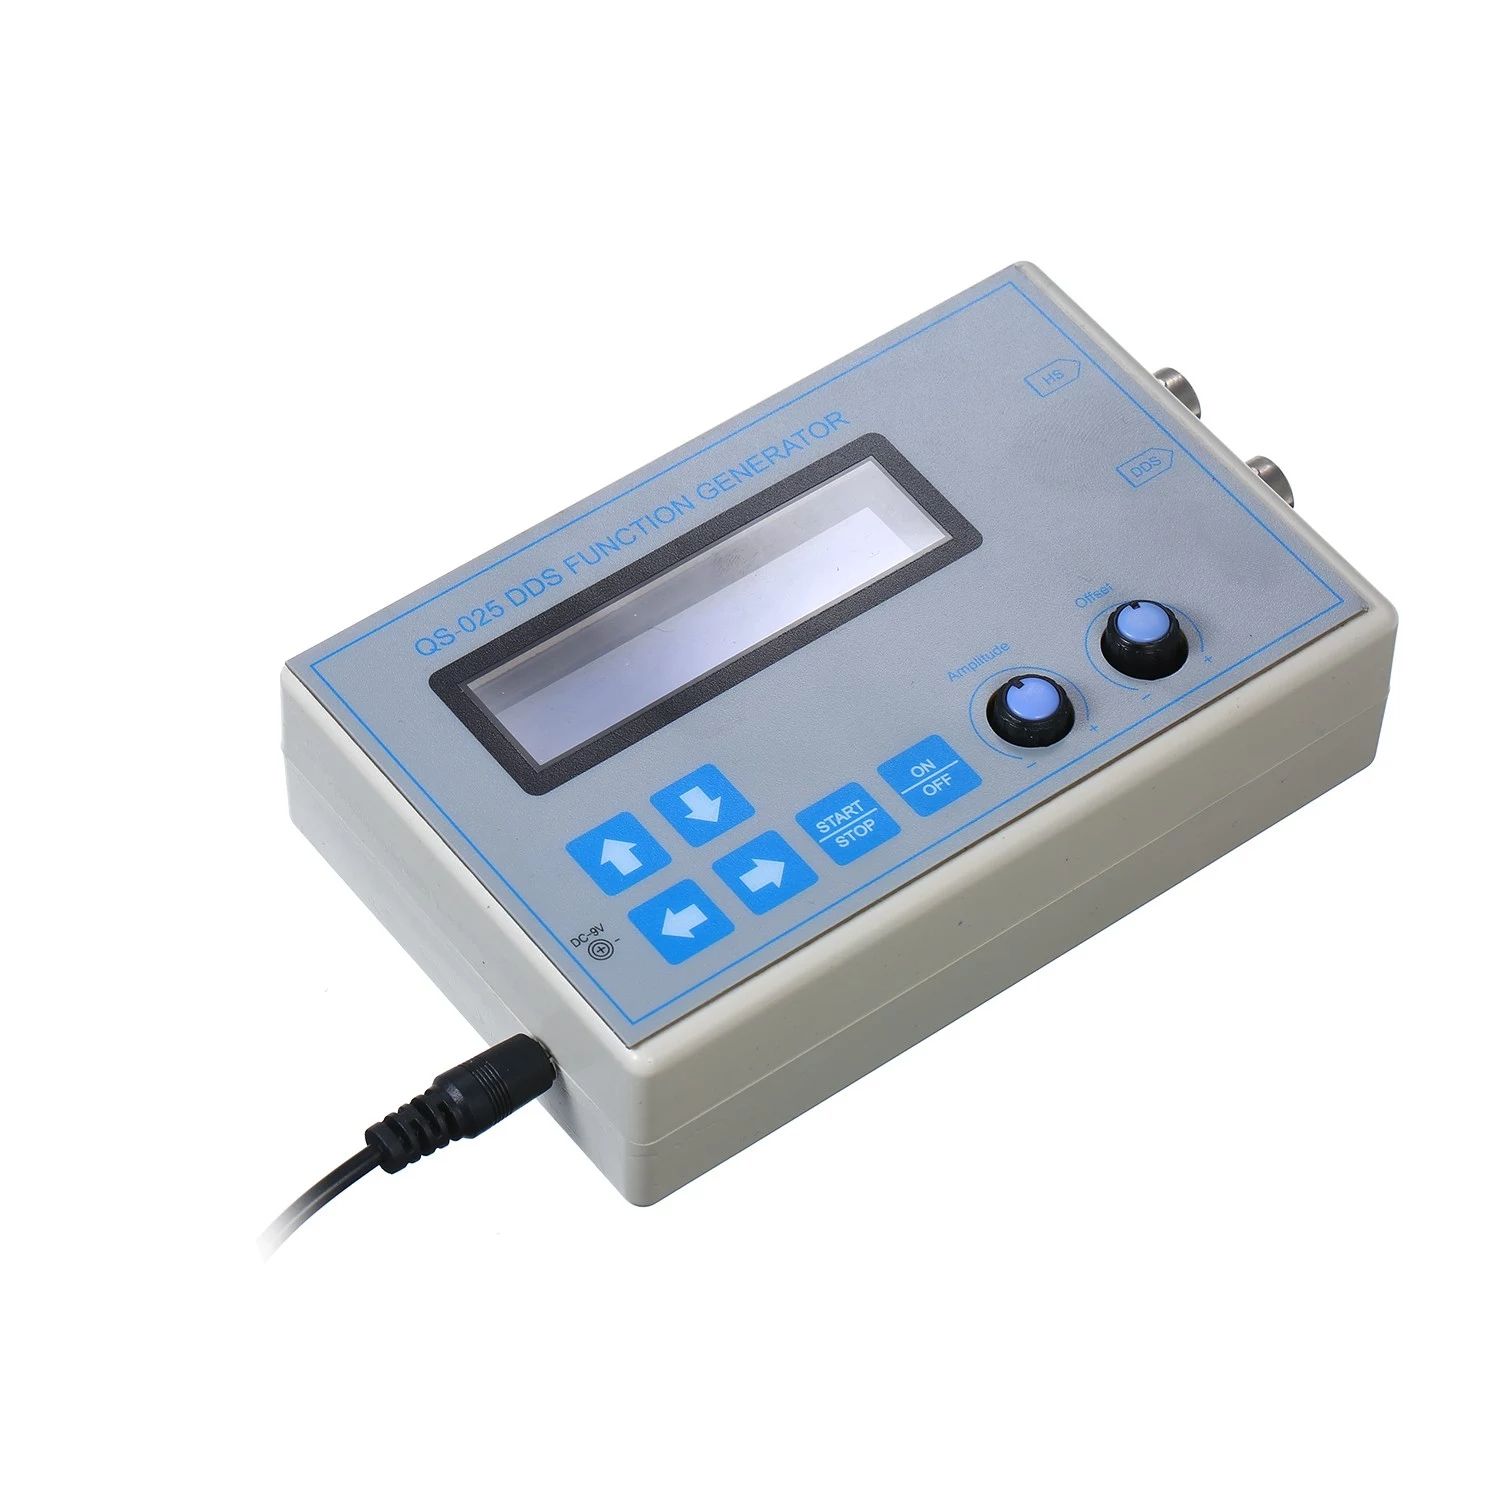 DDS-Function-Signal-Generator-Sine-Square-Triangle-Sawtooth-Wave-Low-Frequency-LCD-Display-USB-Cable-1715016